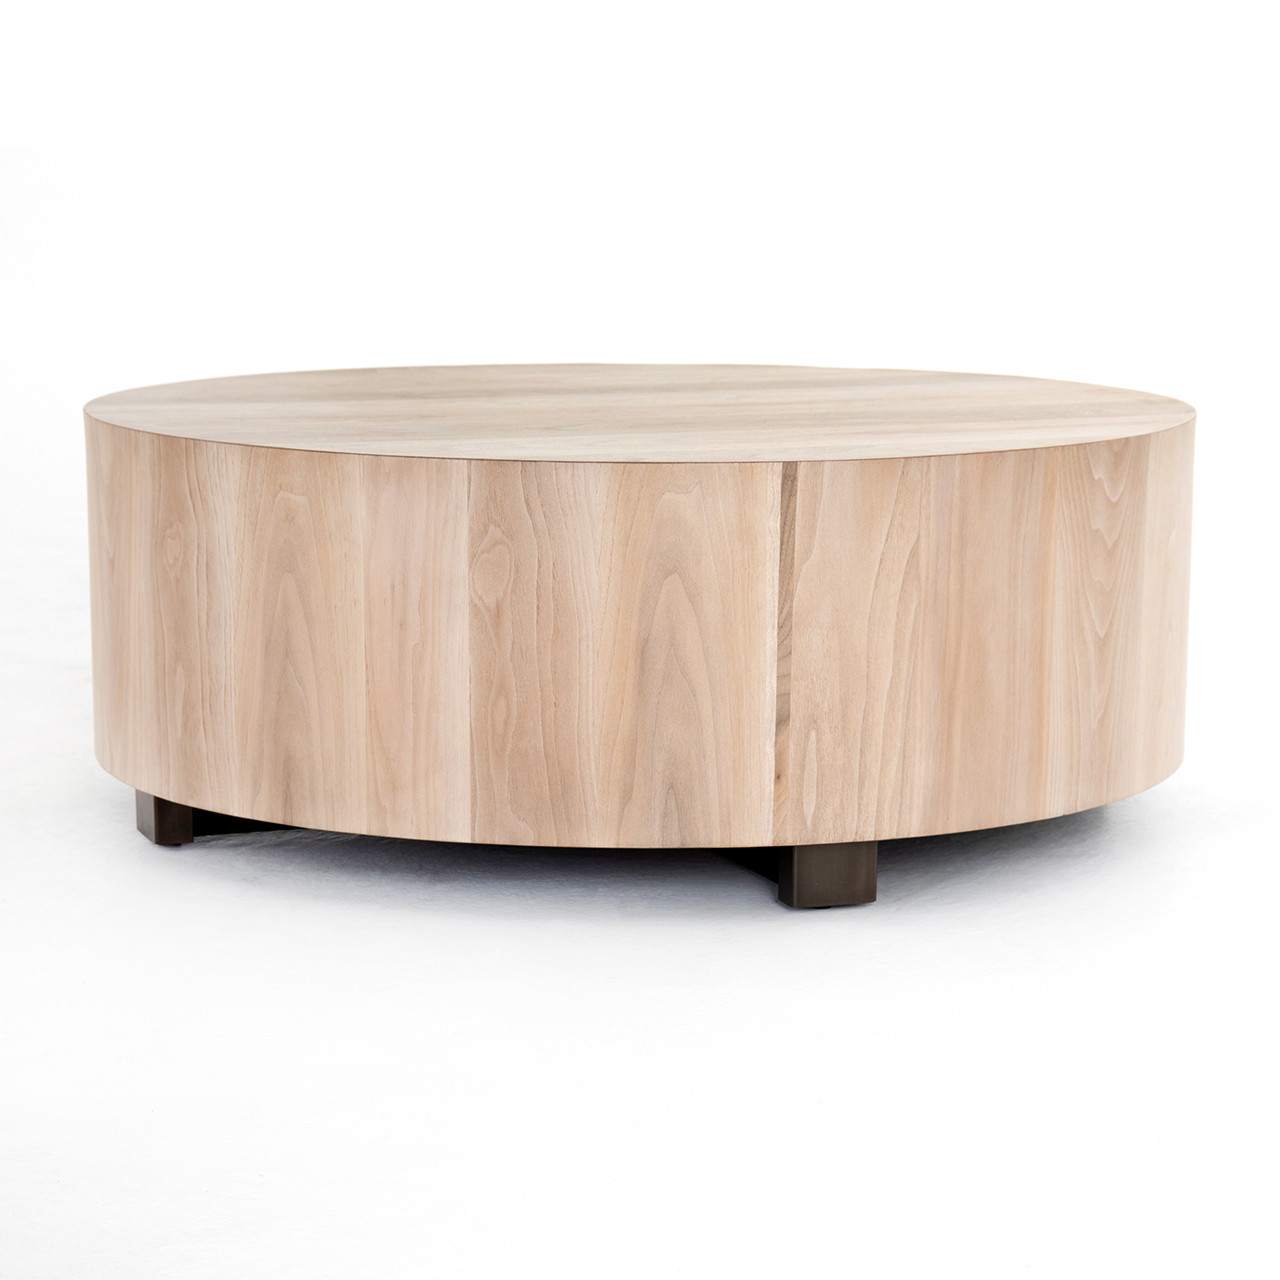 Henry 40" Round Coffee Table